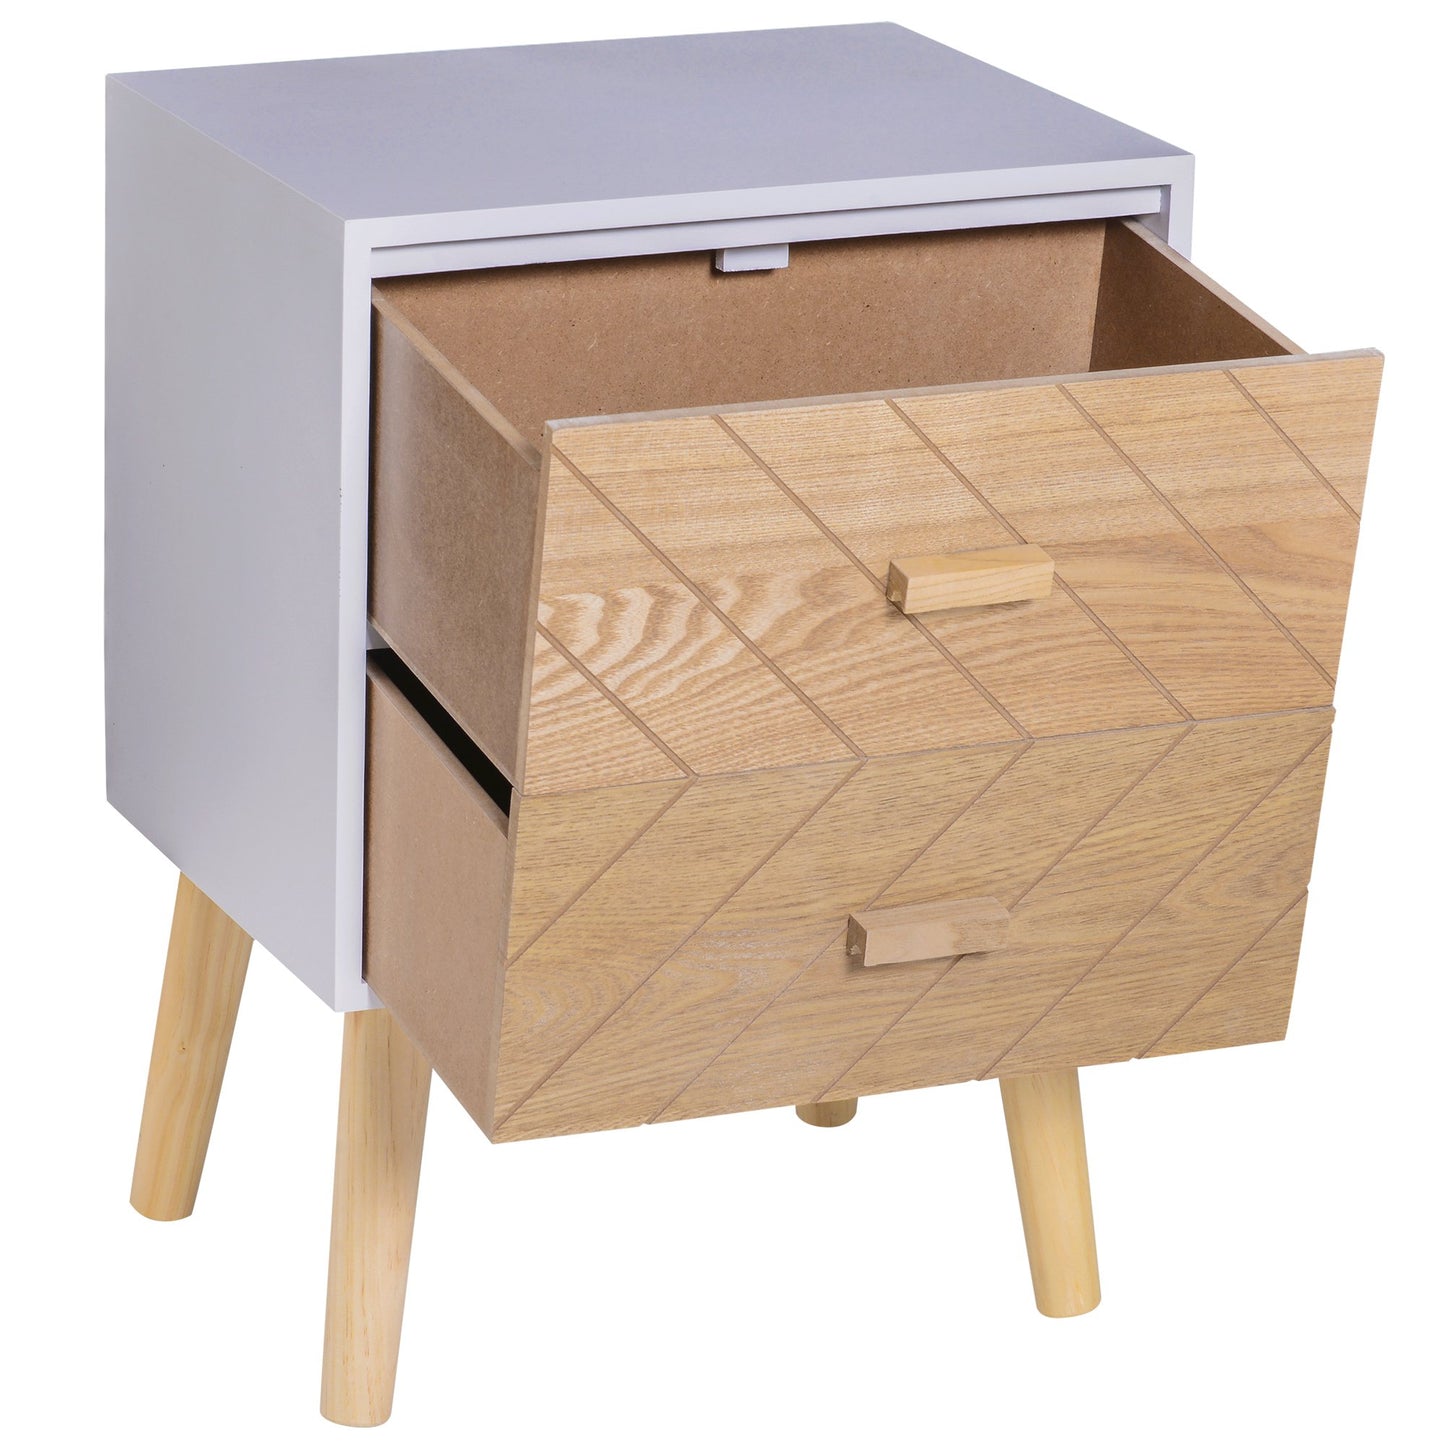 HOMCOM Nordic Style 2 Drawers Side Cabinet, 40Wx30Dx55.5H cm-White/Natural Wood Colour